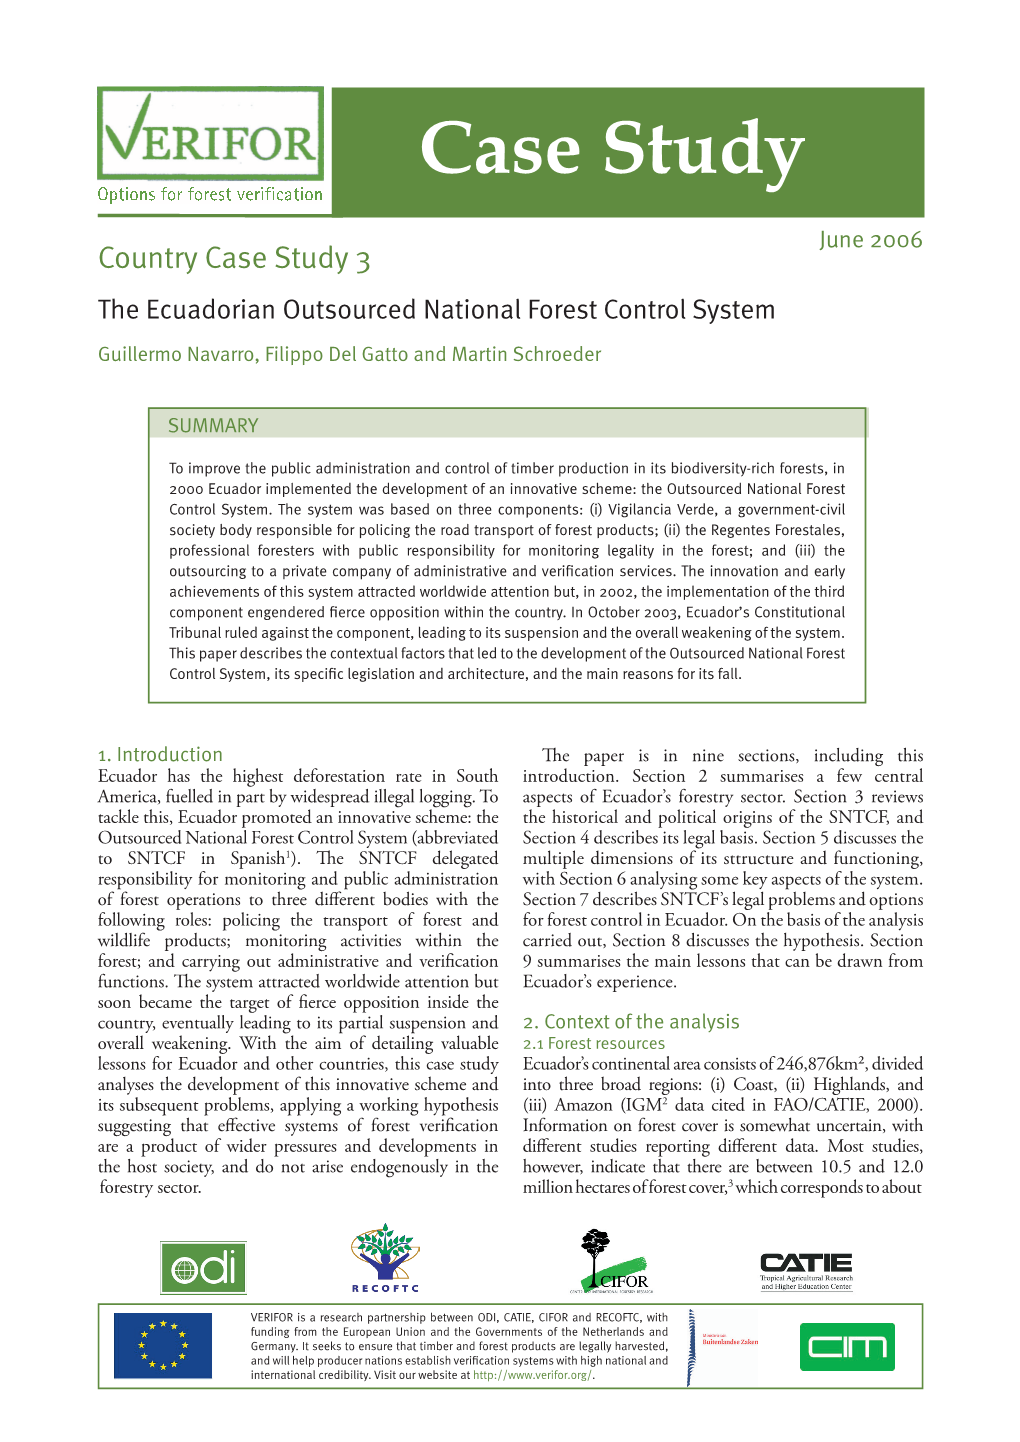 Country Case Study 3 the Ecuadorian Outsourced National Forest Control System Guillermo Navarro, Filippo Del Gatto and Martin Schroeder